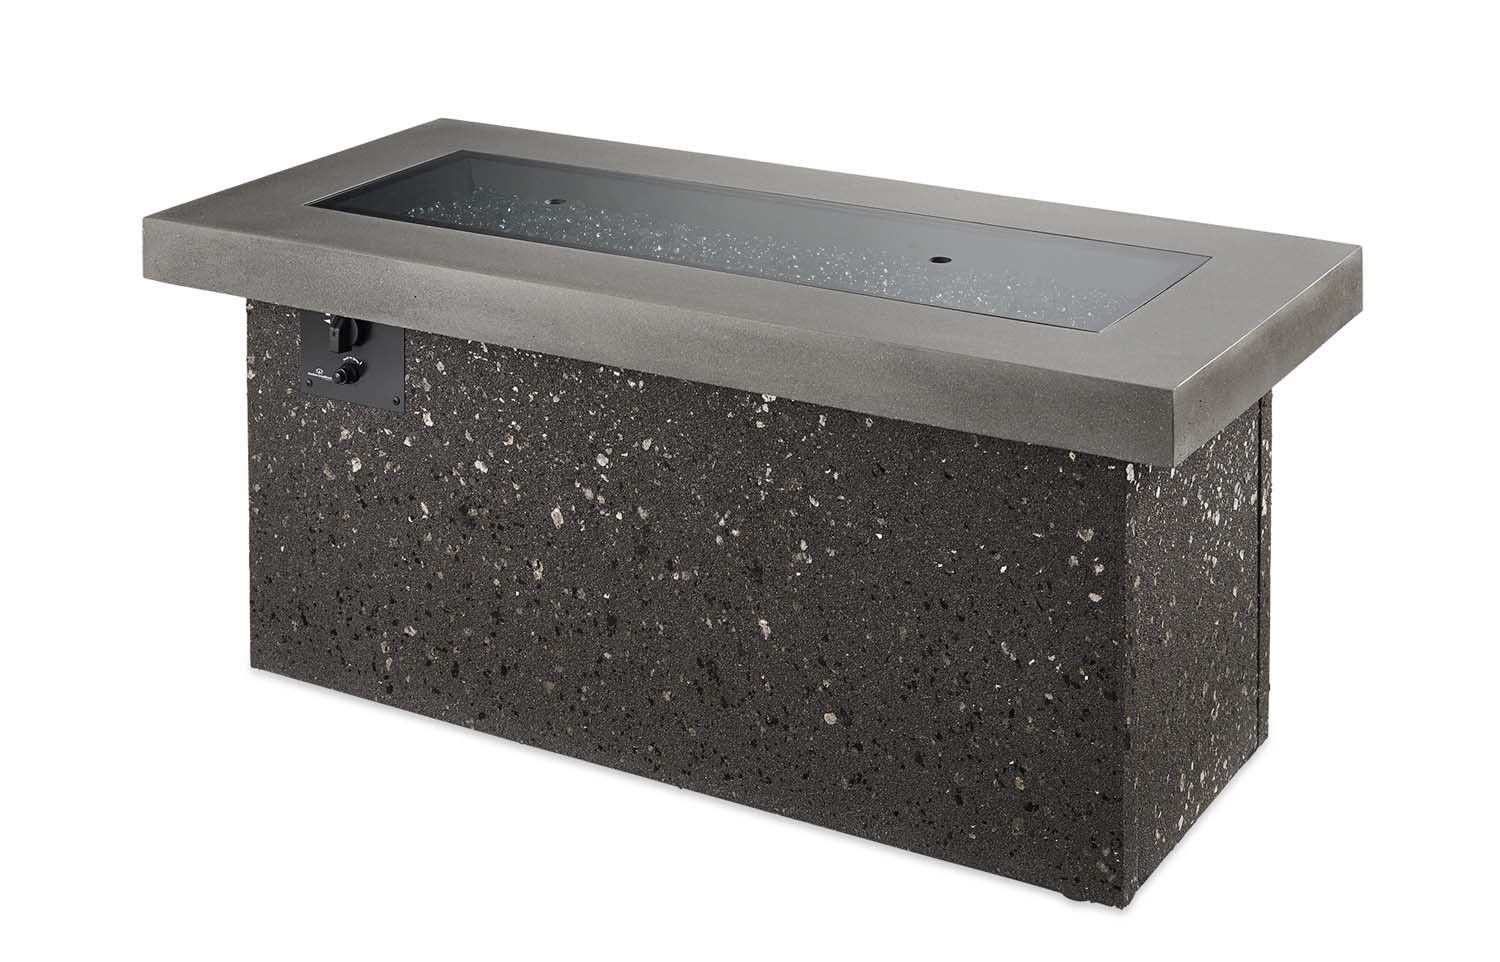 Outdoor Greatroom - Grey Key Largo Linear Gas Fire Pit Table w/Direct Spark Ignition (LP) - KL1242MDSILP